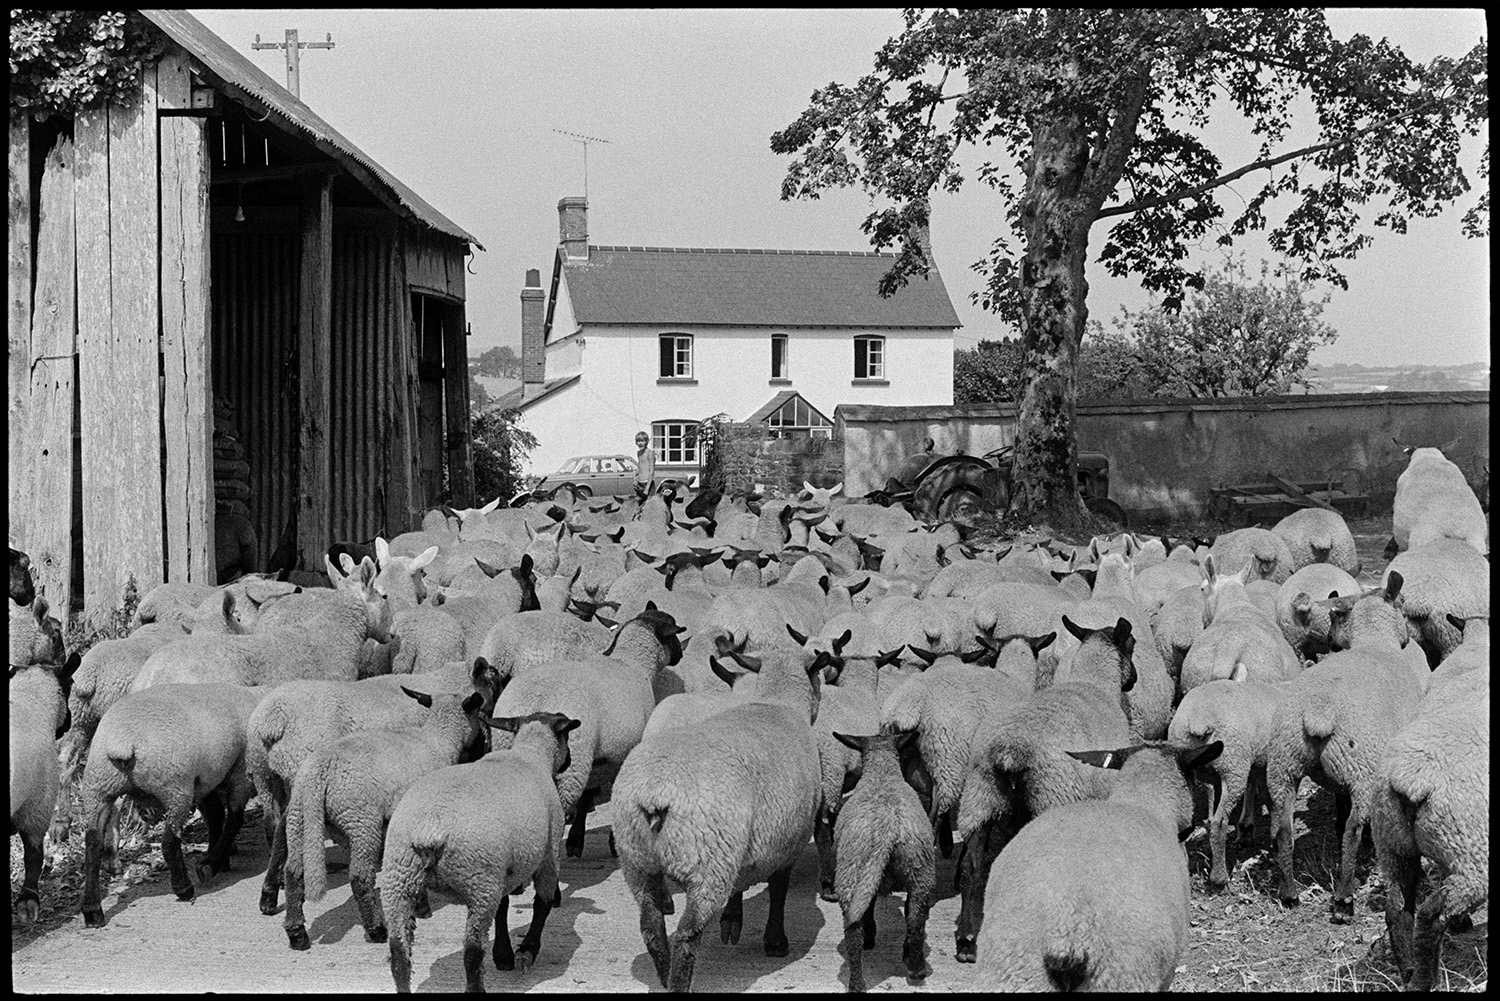 Sheep being driven through farm lanes. 
[A flock of sheep being led by a boy past a barn at Parsonage, Iddesleigh. A house, tree and tractor can also be seen in the background.]